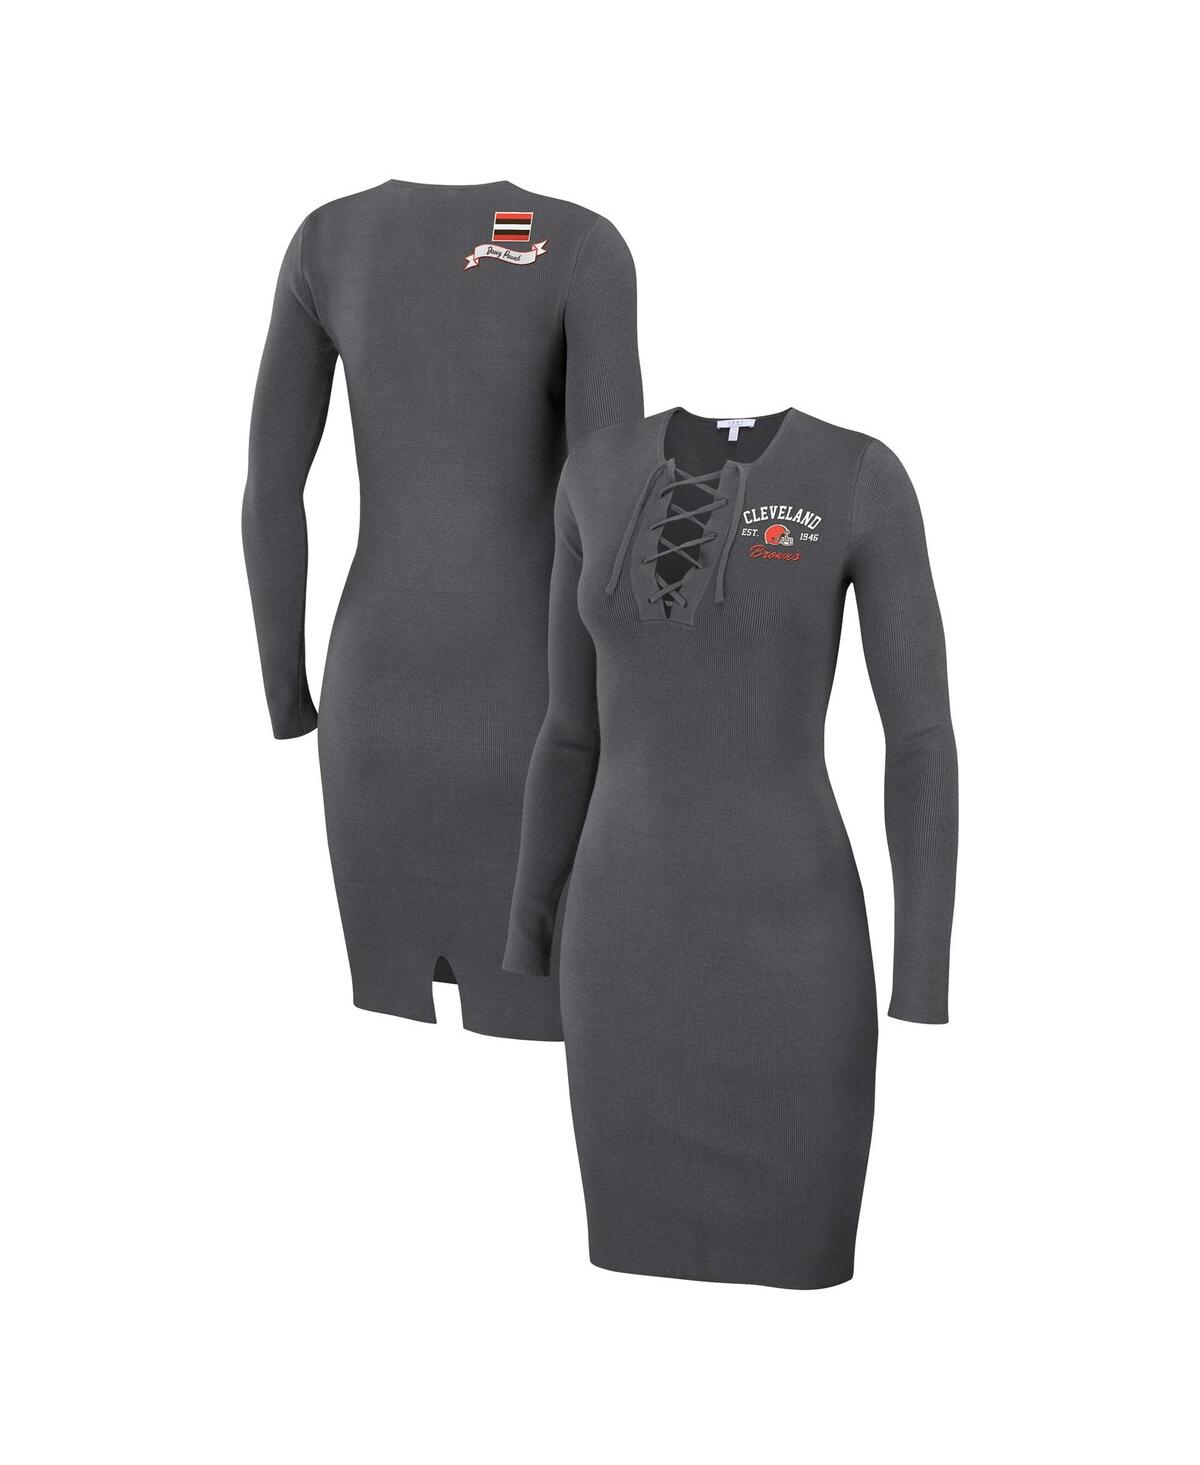 Shop Wear By Erin Andrews Women's  Charcoal Cleveland Browns Lace Up Long Sleeve Dress